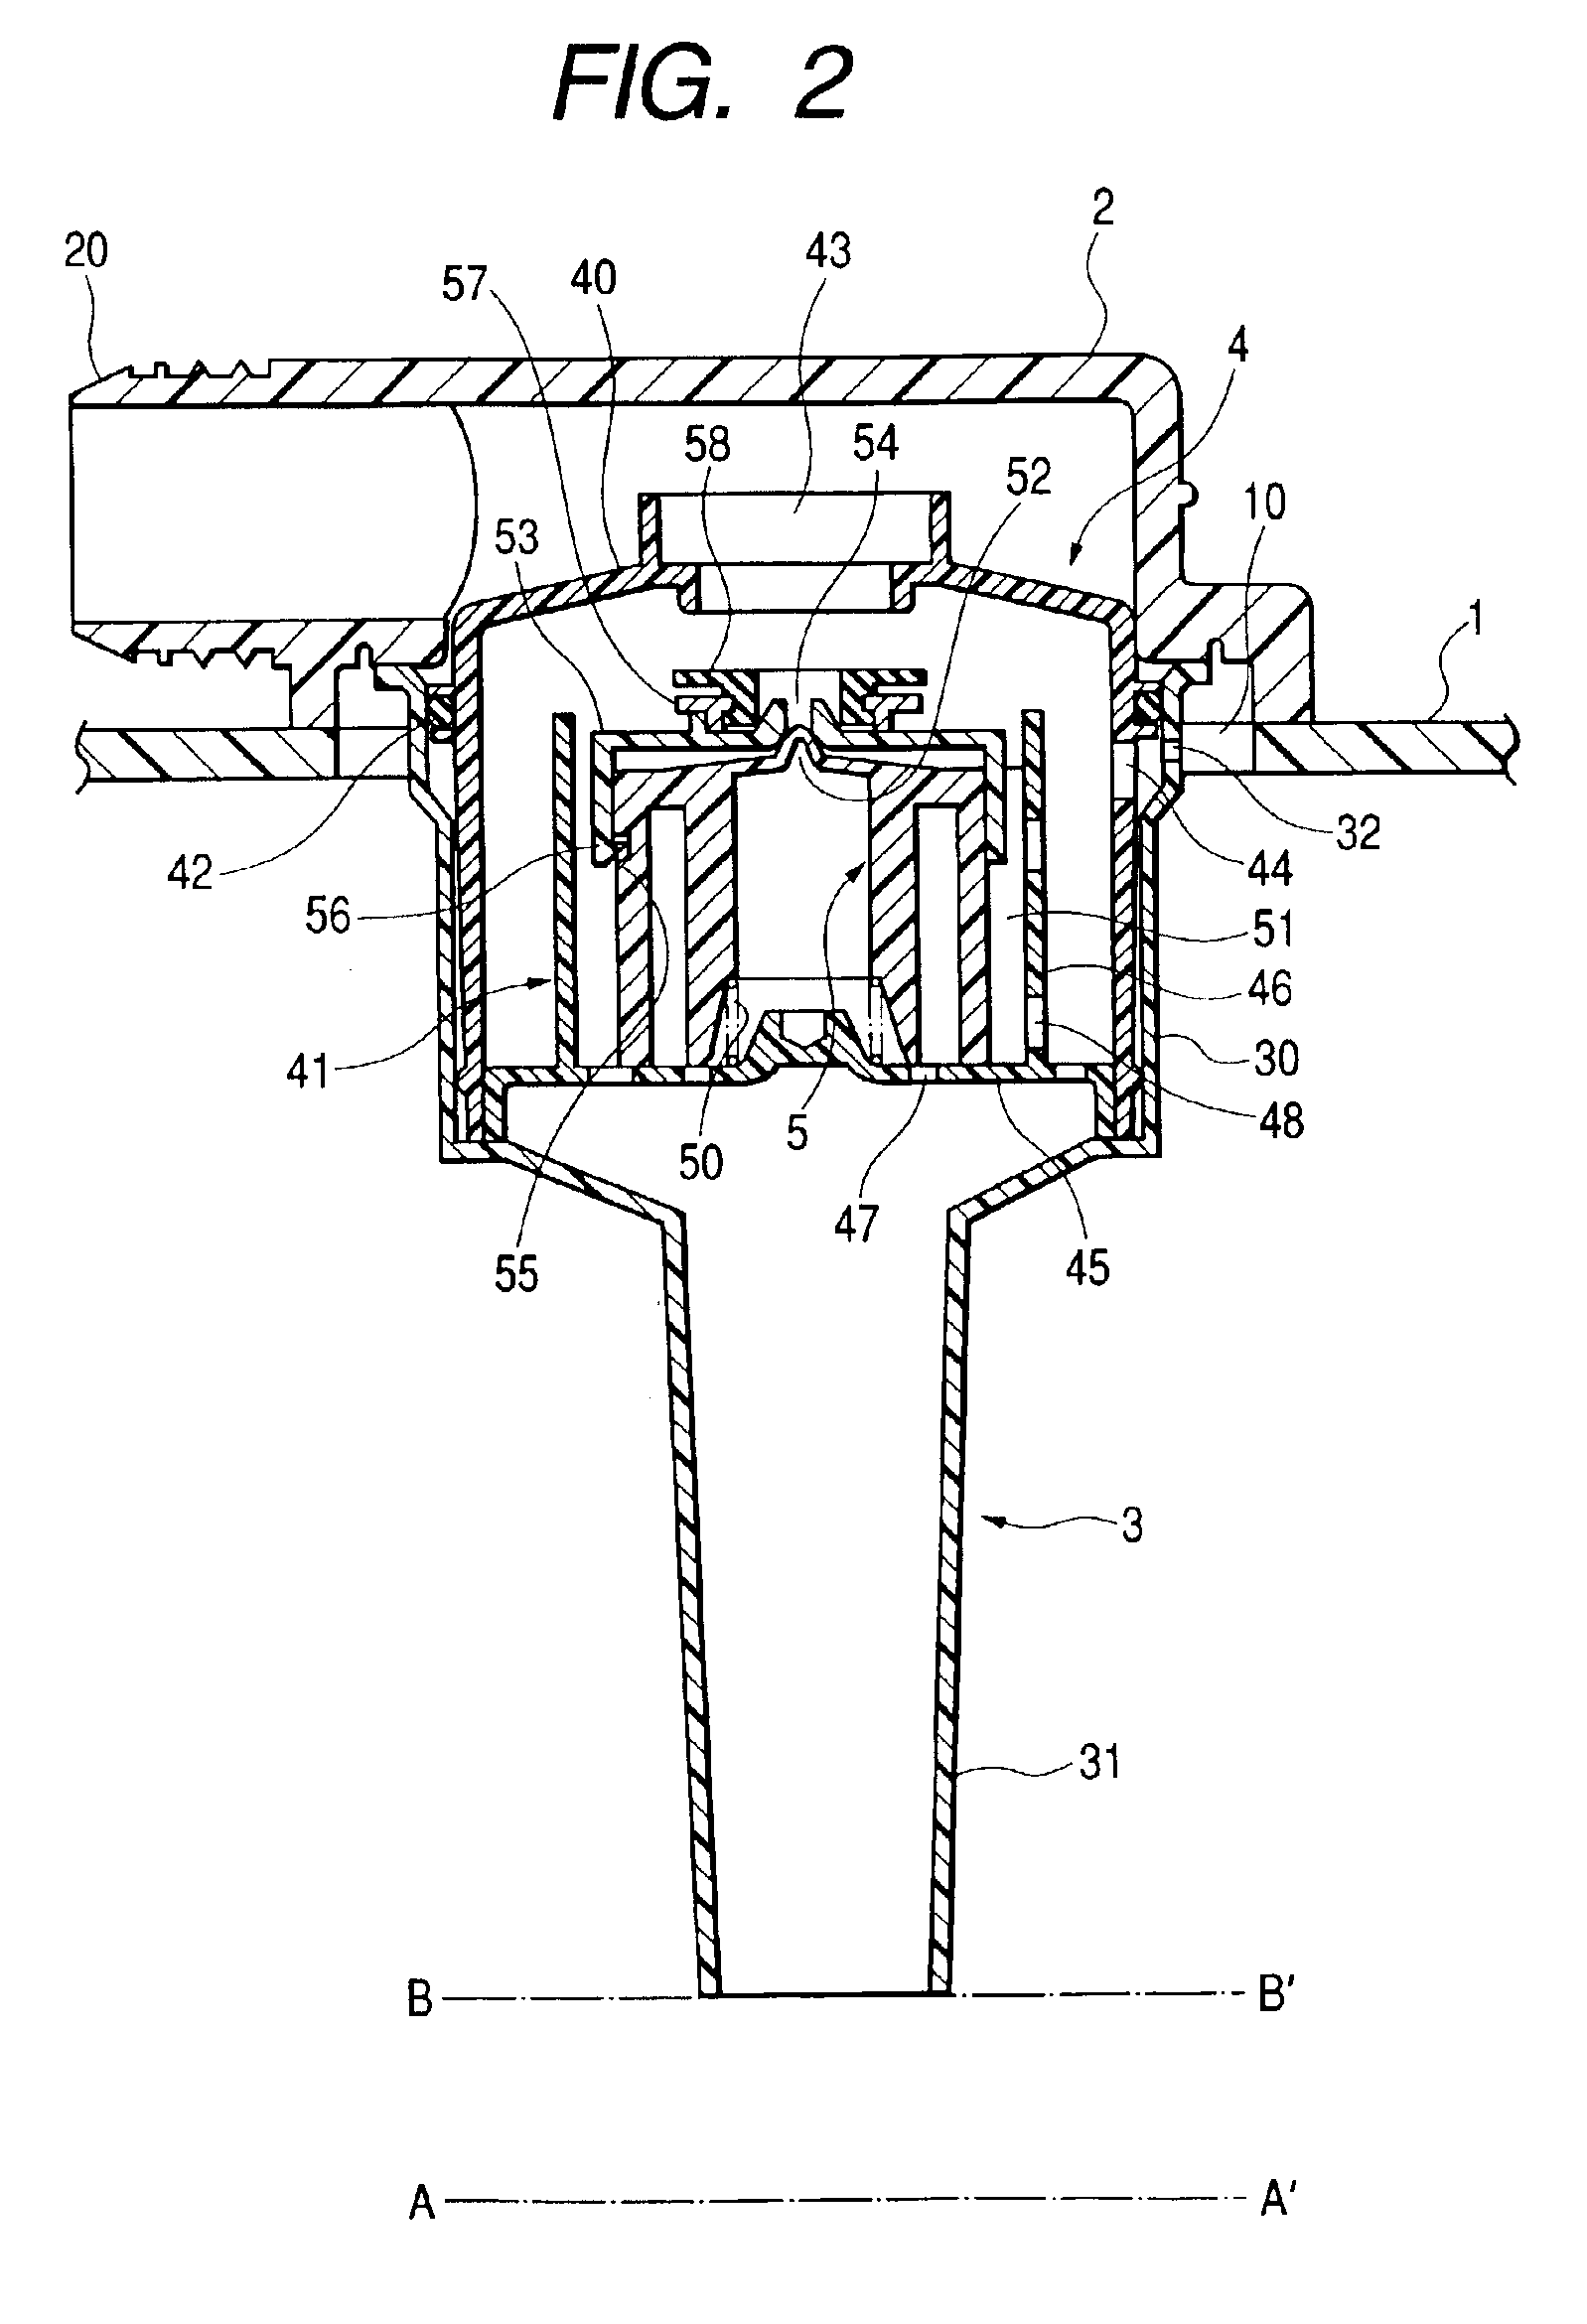 Outflow-limiting device of fuel tank